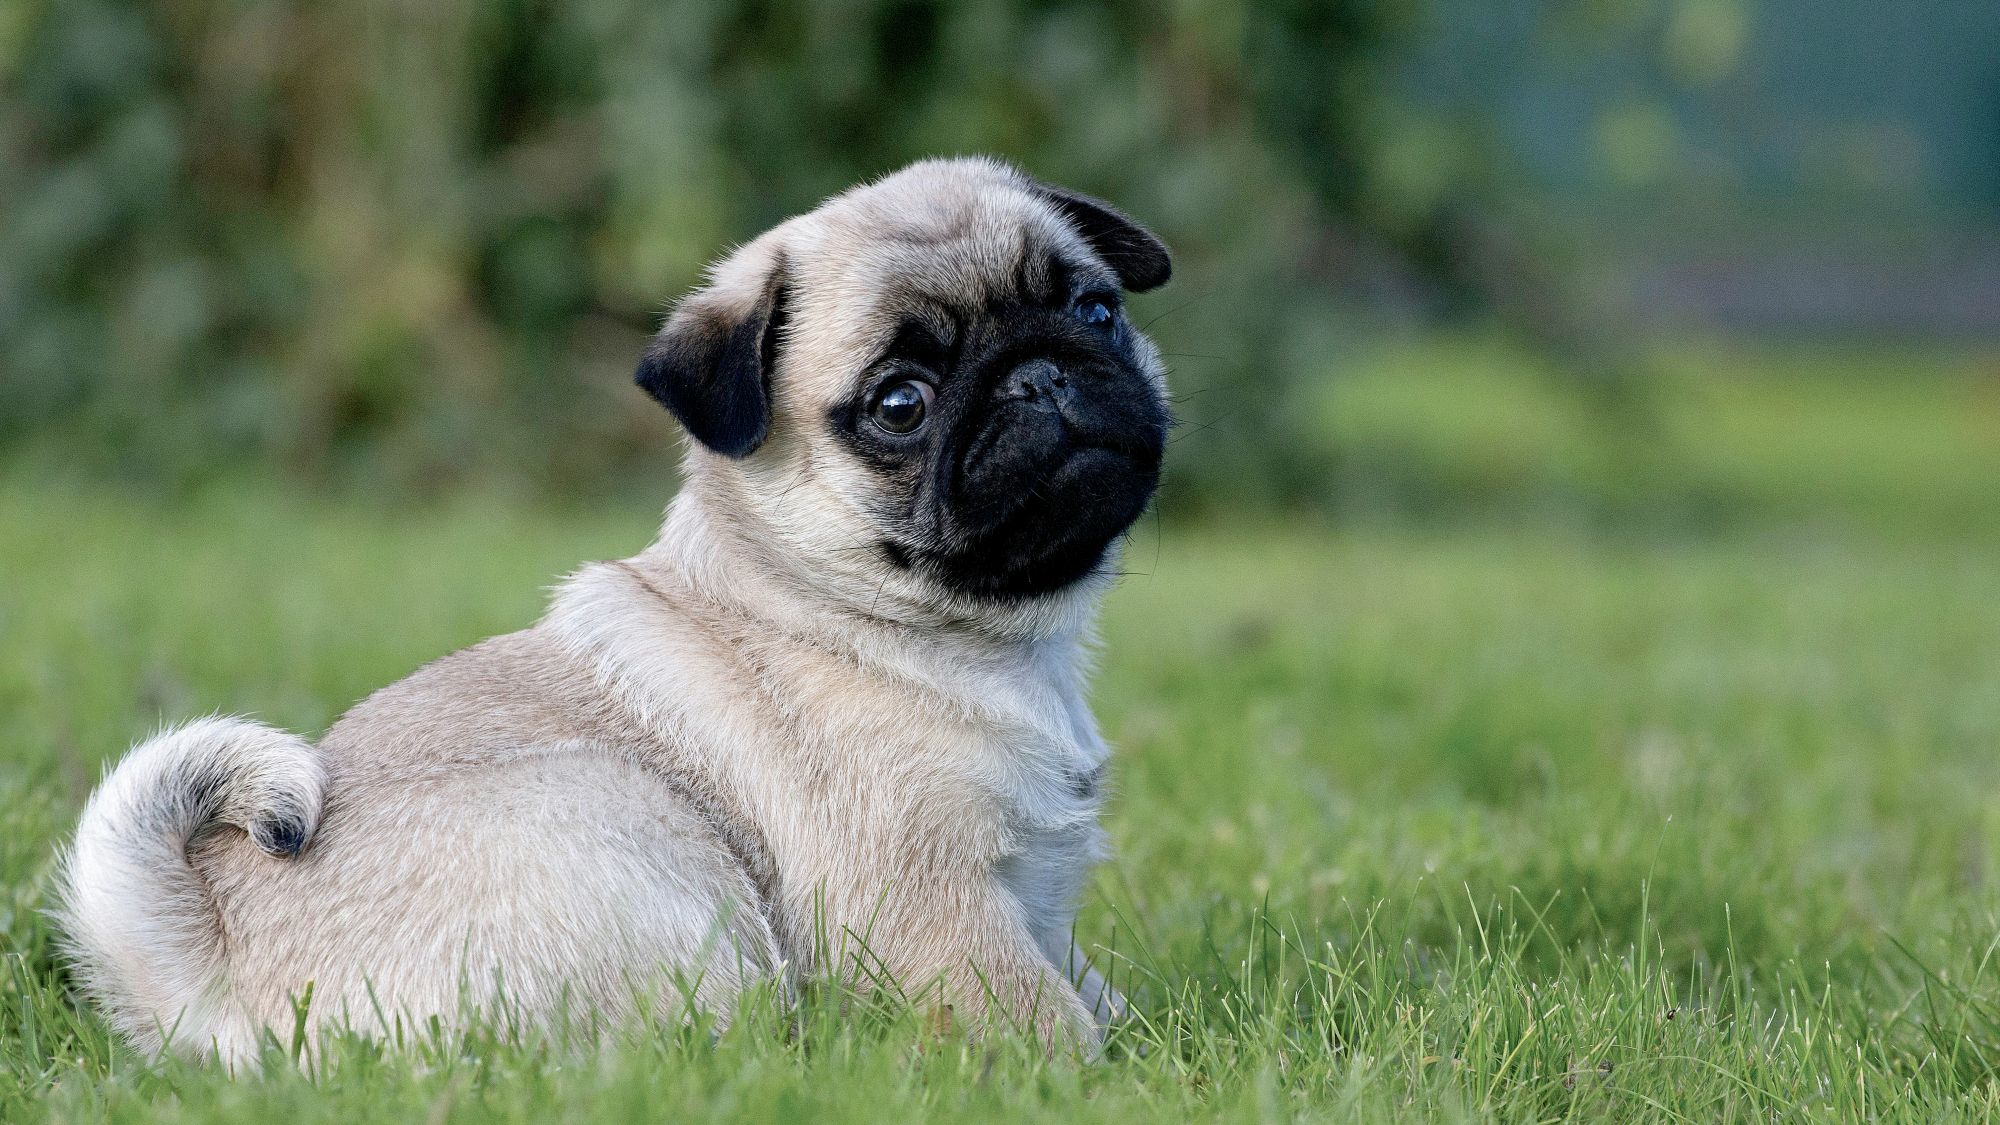 Pug puppy sitting in grass looking at camera